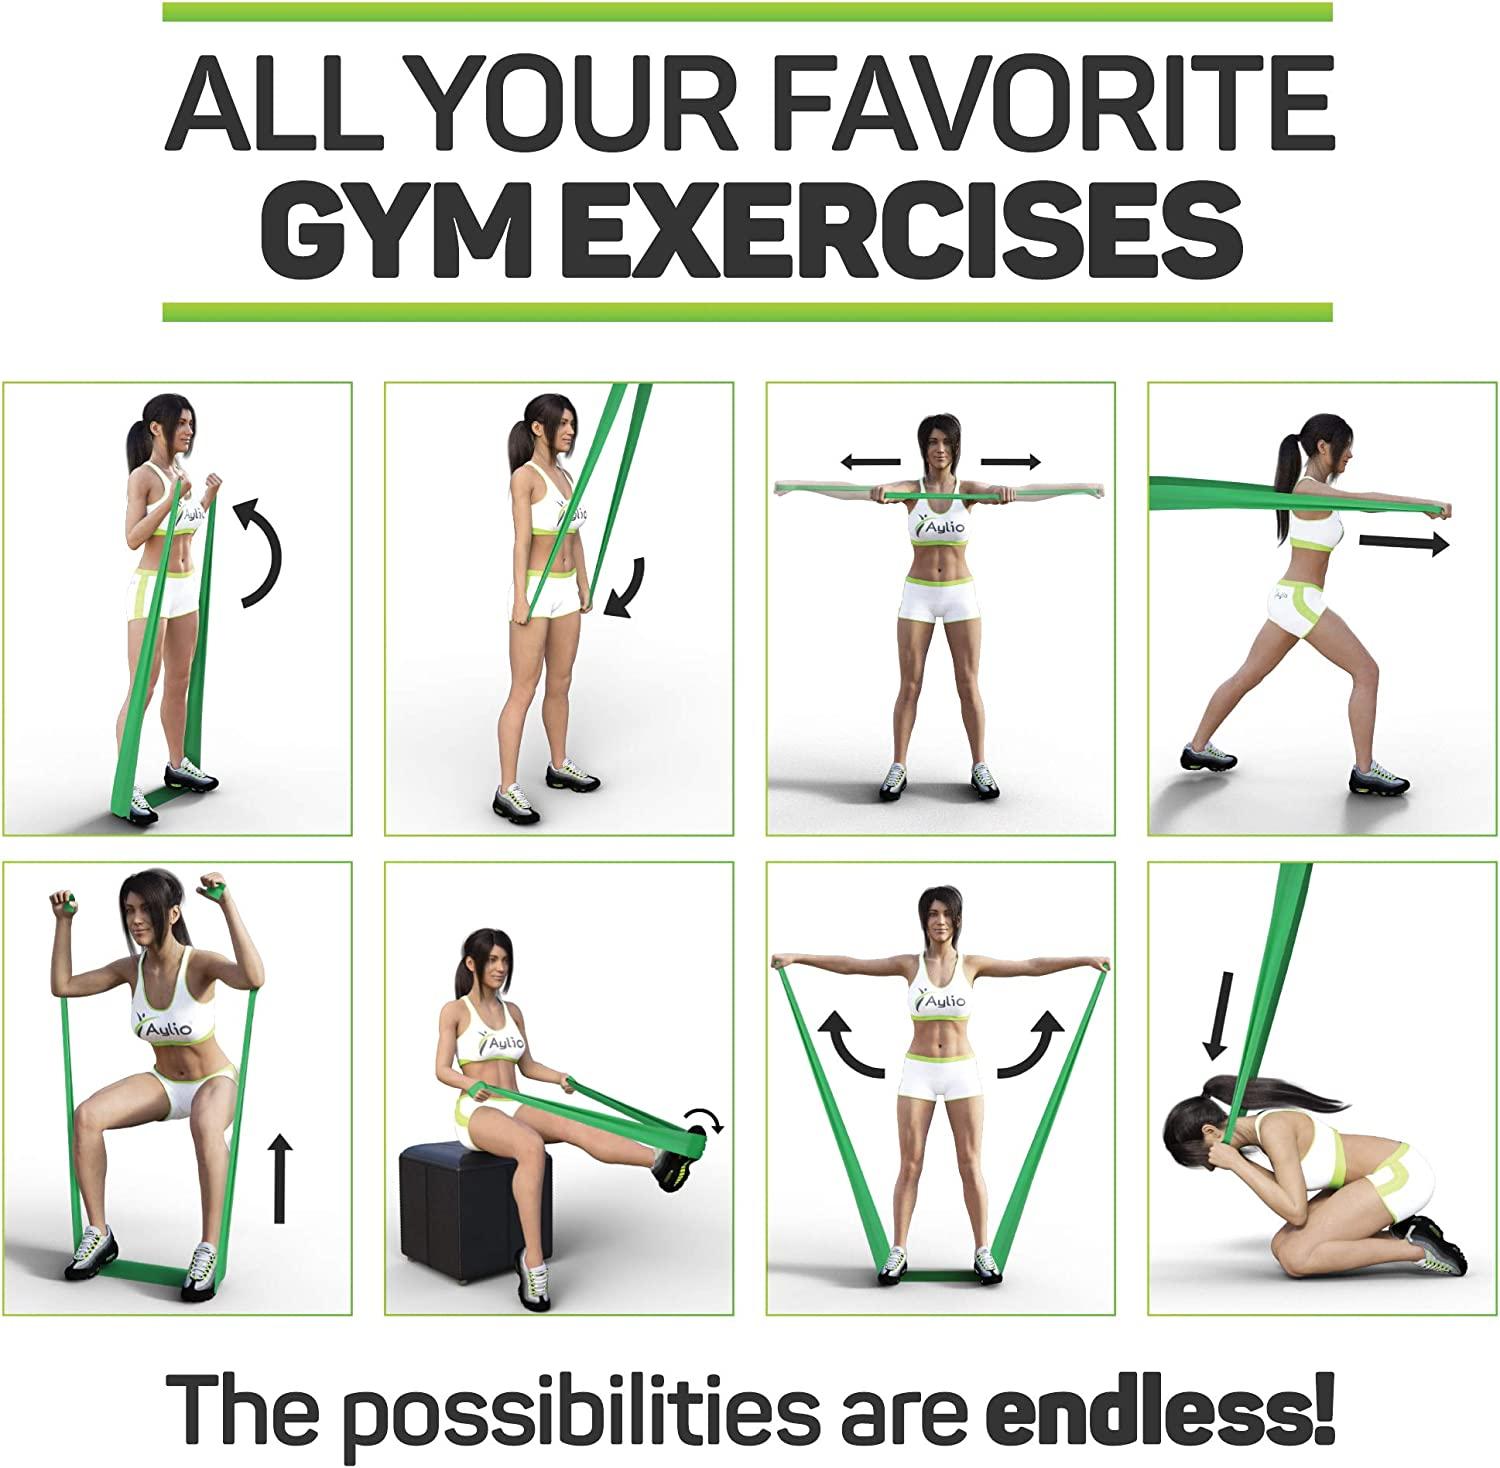 Premium Exercise Bands and Door Anchor